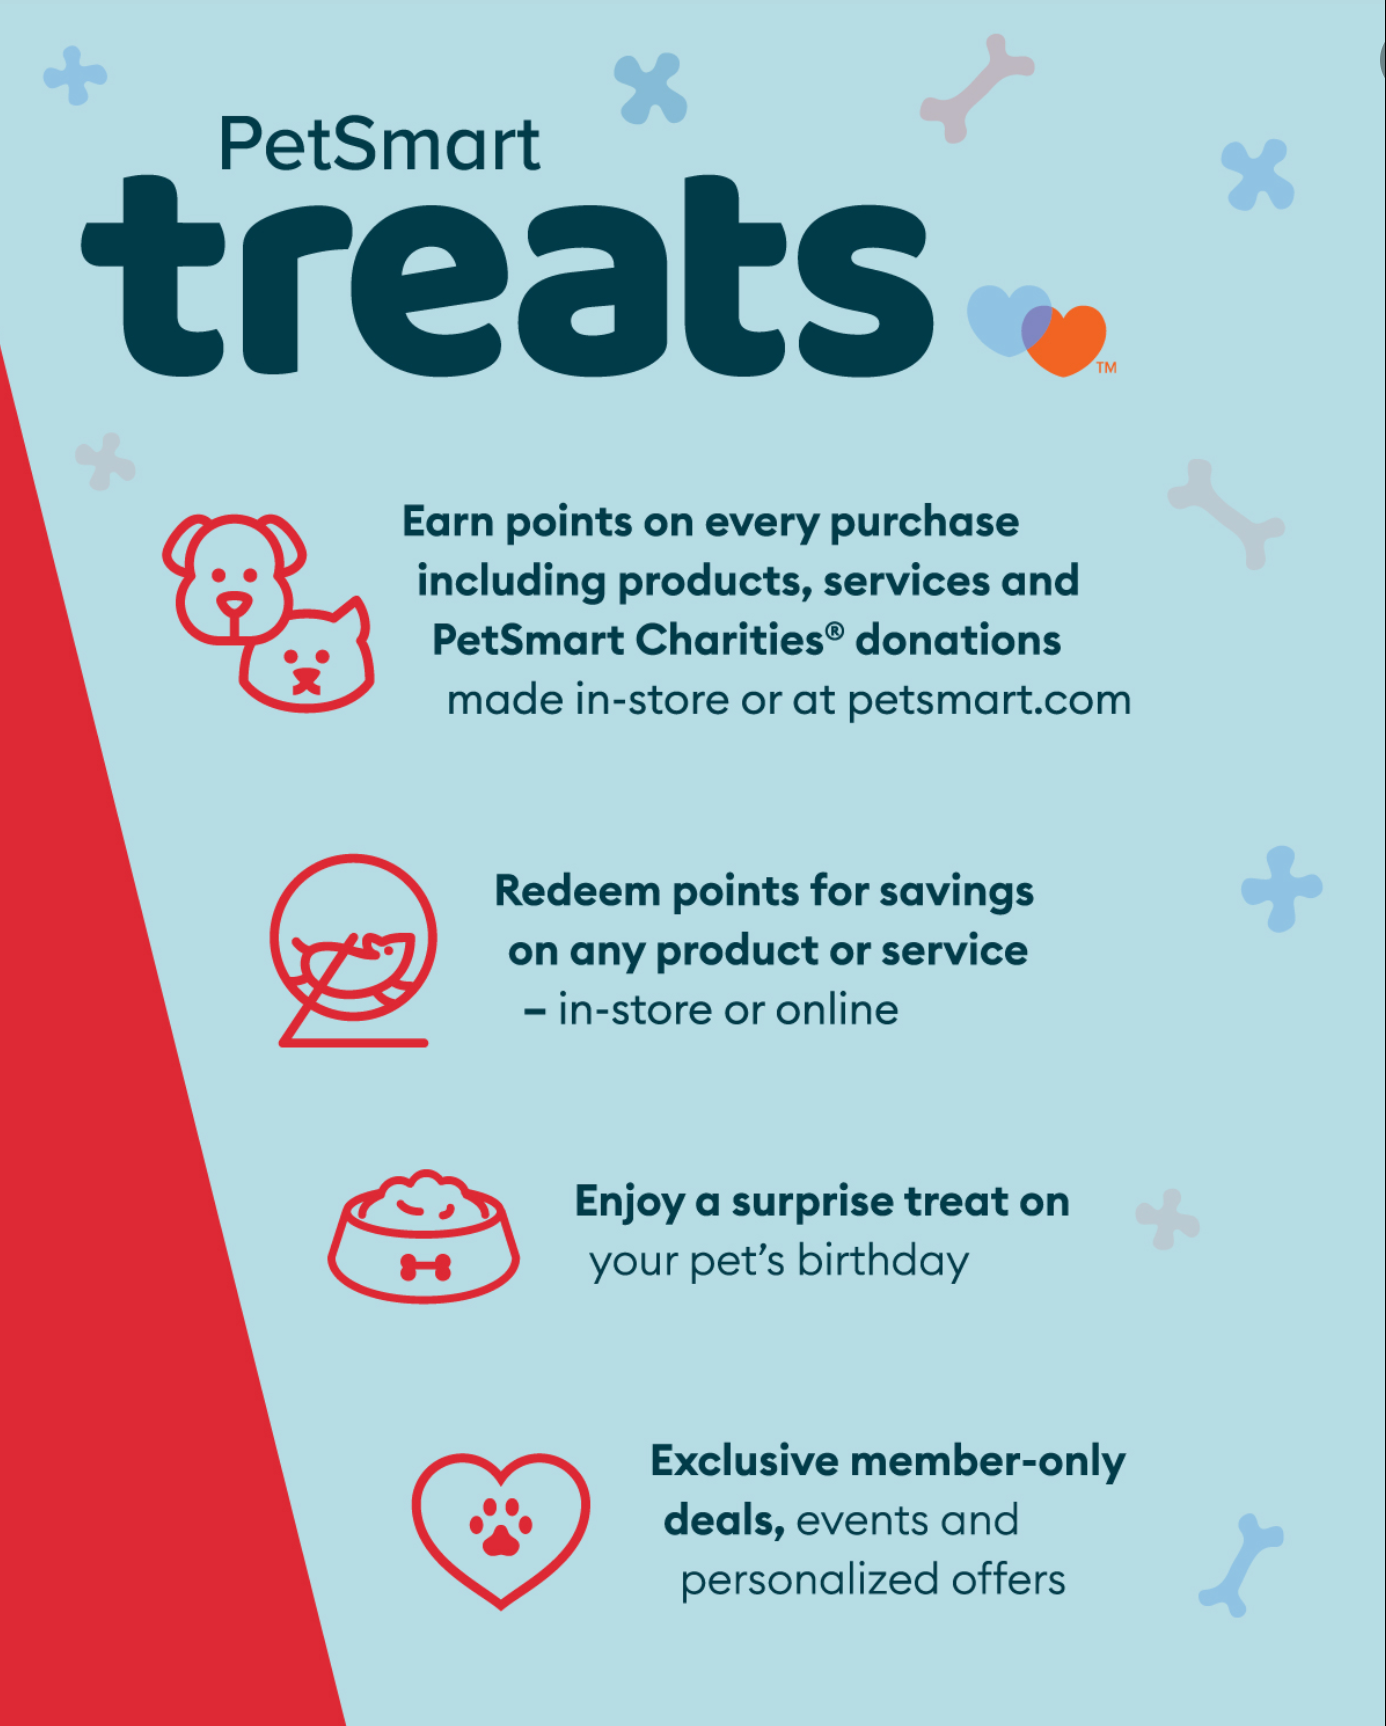 The benefits you get from PetSmart's loyalty program